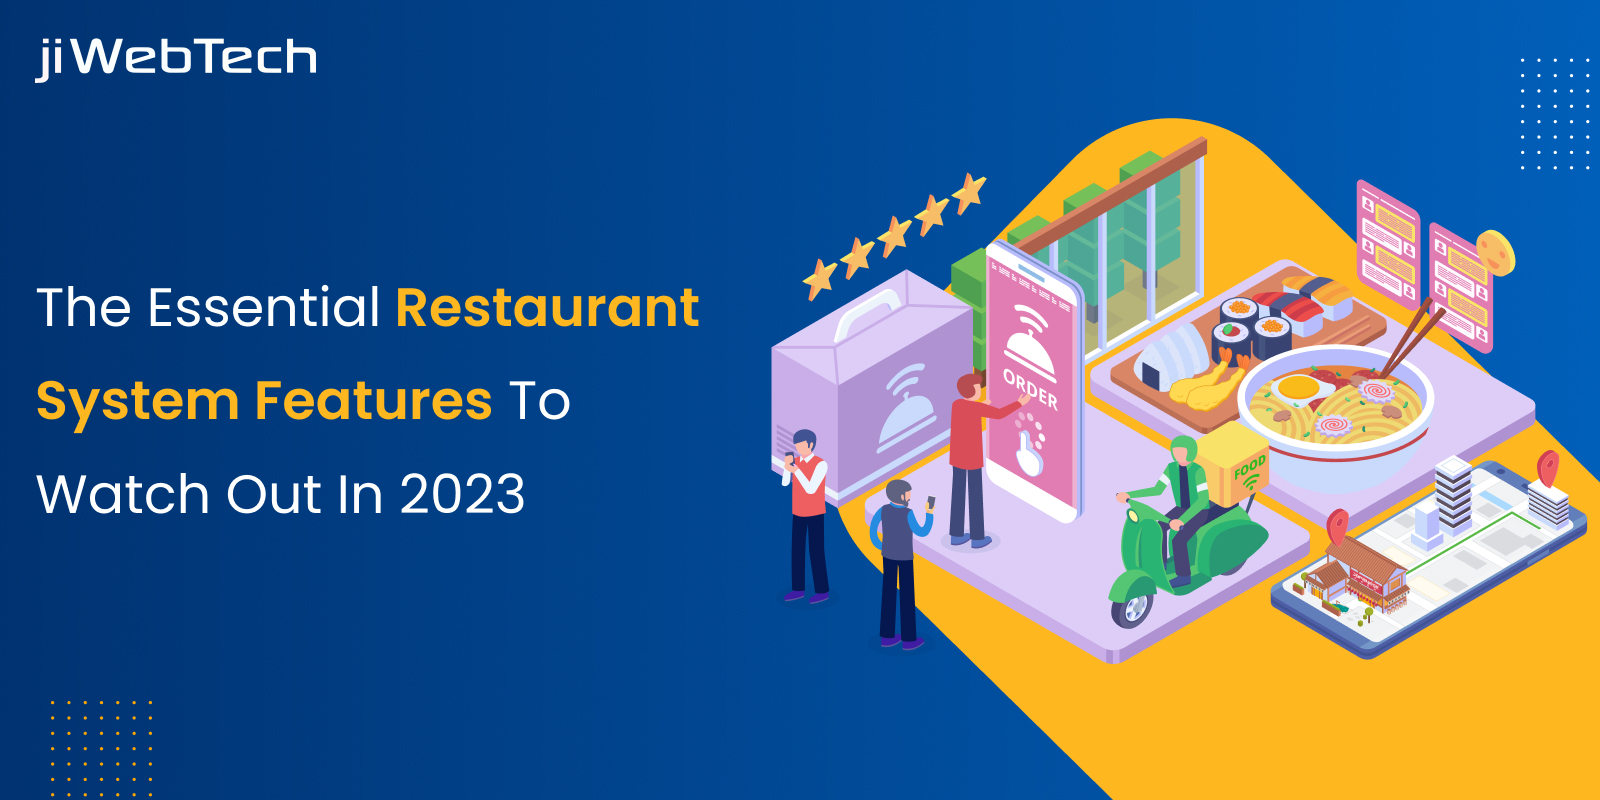 The Essential Restaurant System Features To Watch Out In 2023